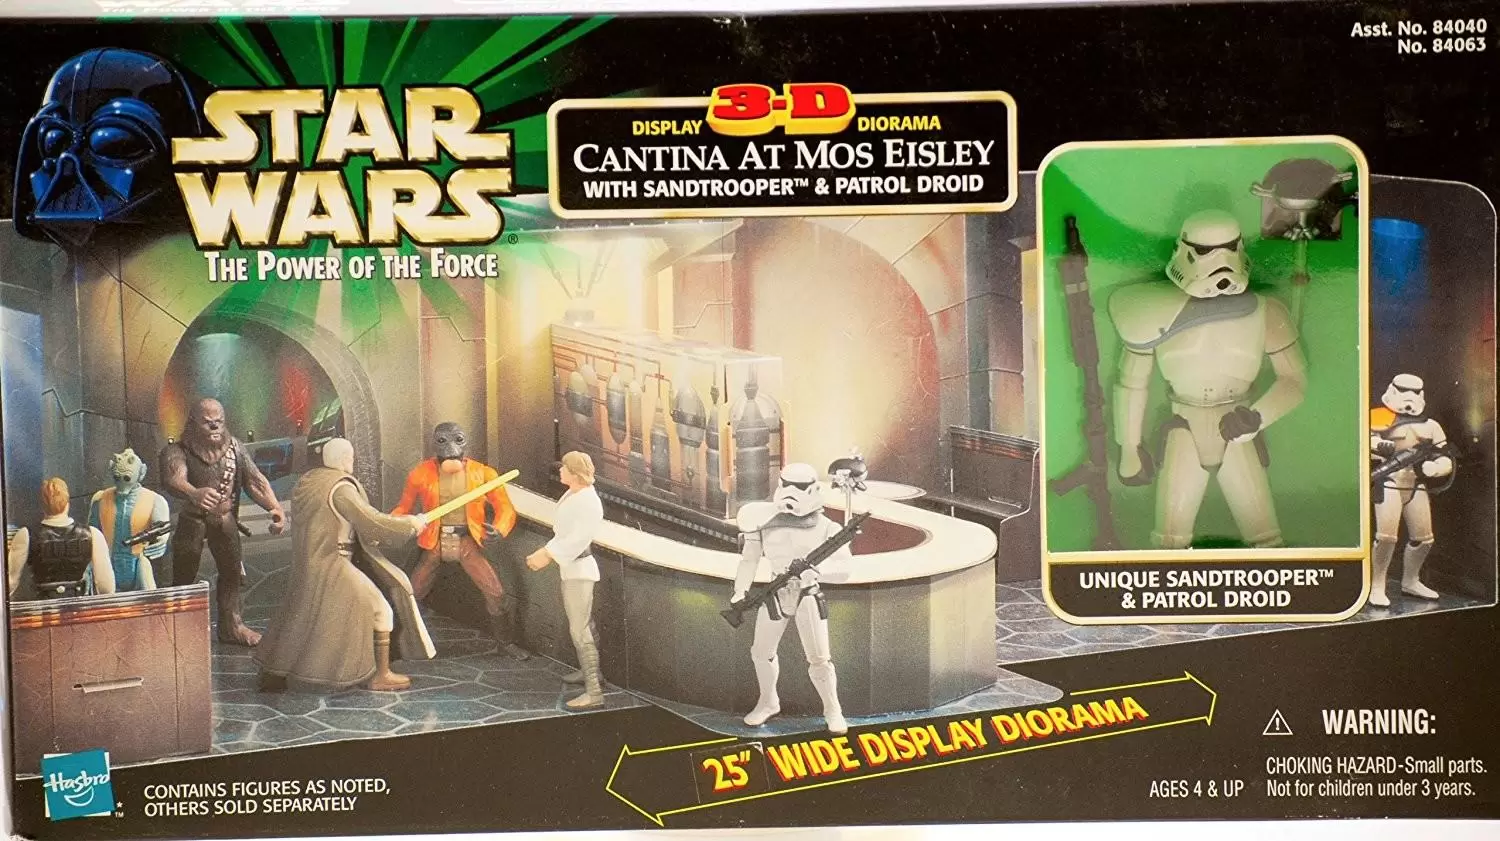 Power of the Force 2 - Display 3D Diorama : Cantina at Mos Eisley